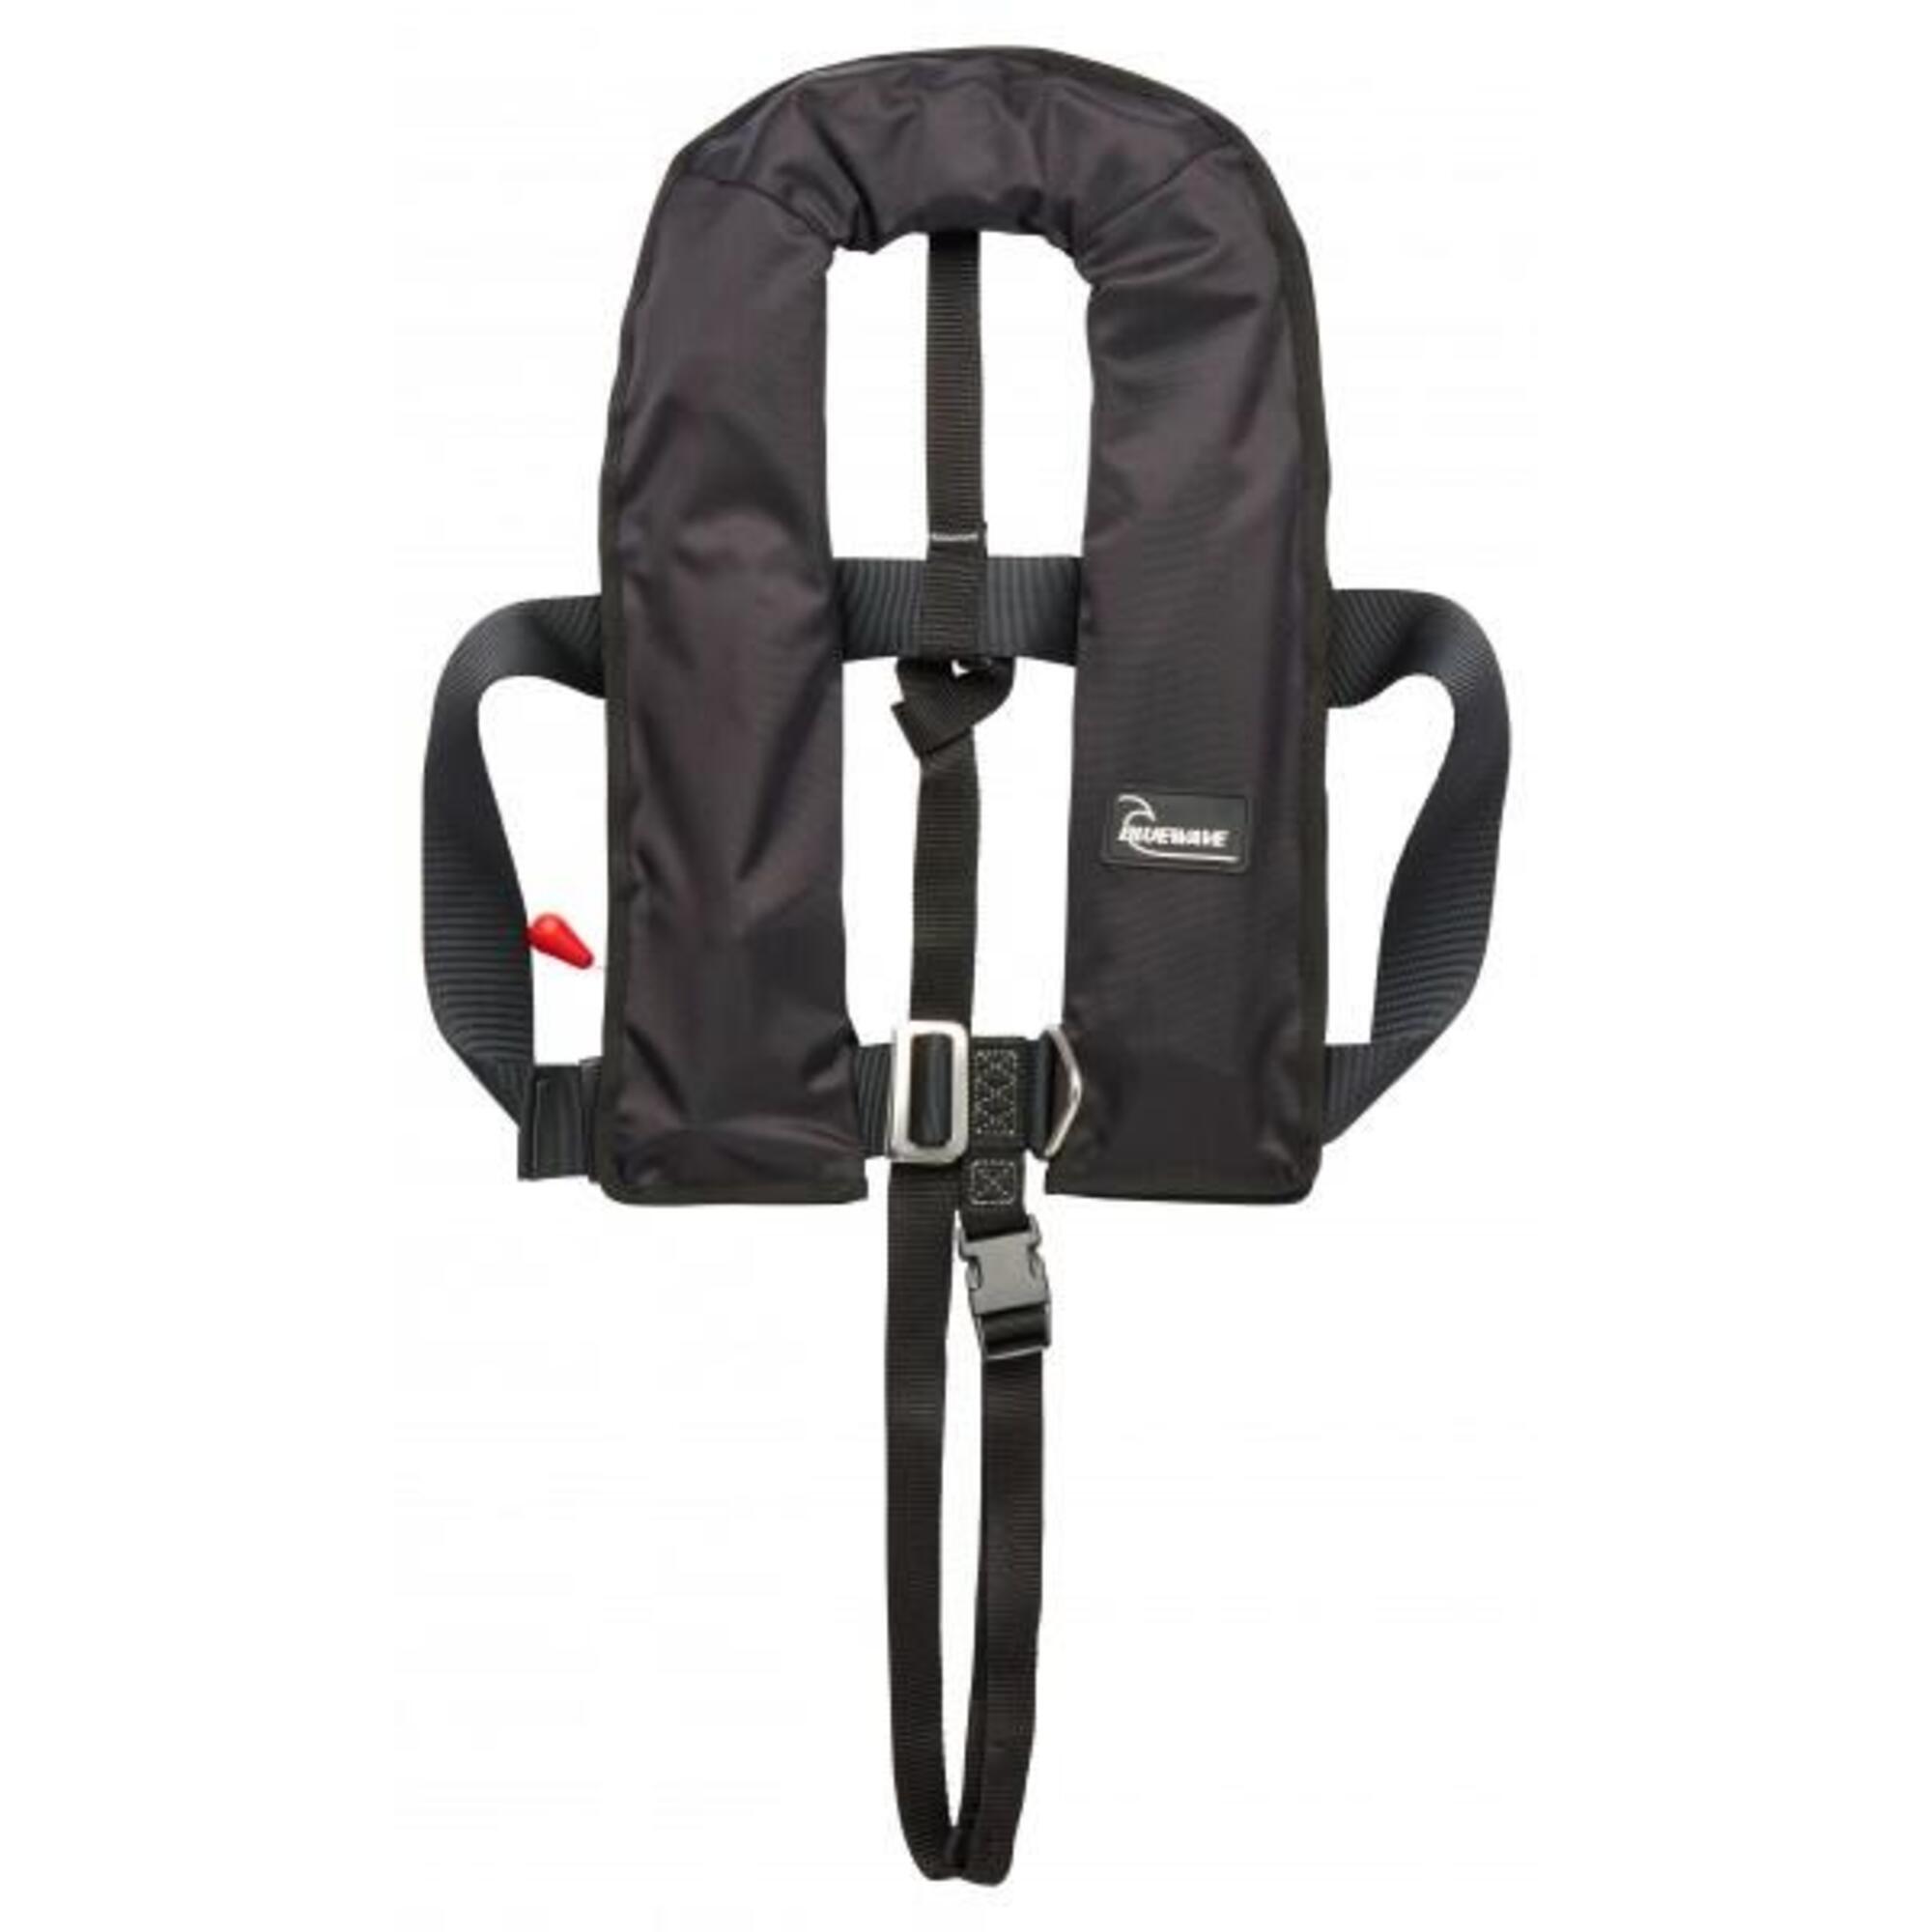 BLUEWAVE Bluewave 150N Automatic Lifejacket with harness & crutch strap